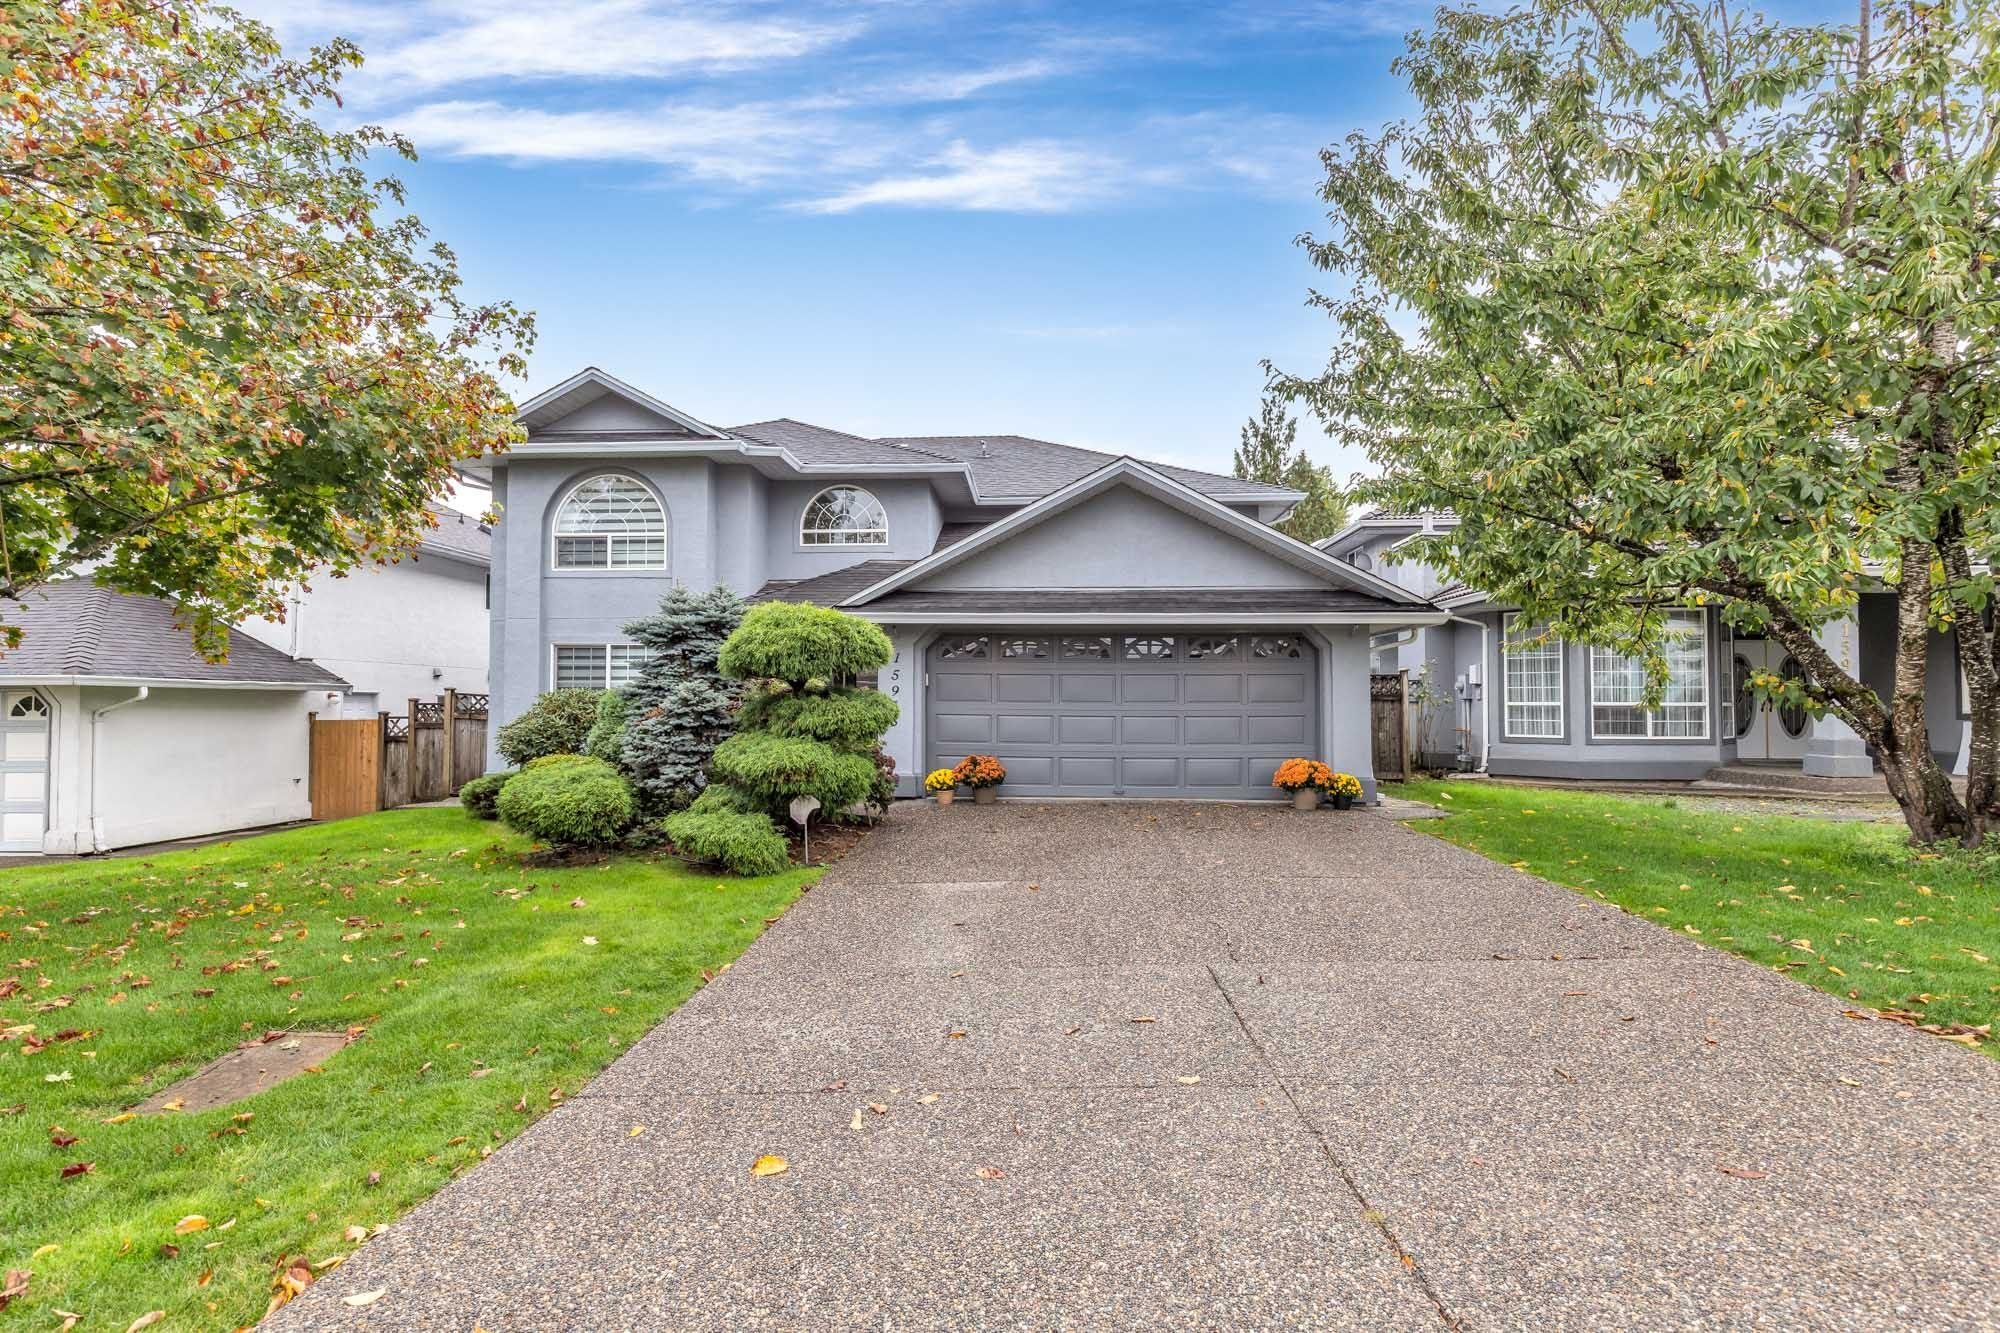 I have sold a property at 15918 99 AVE in Surrey
